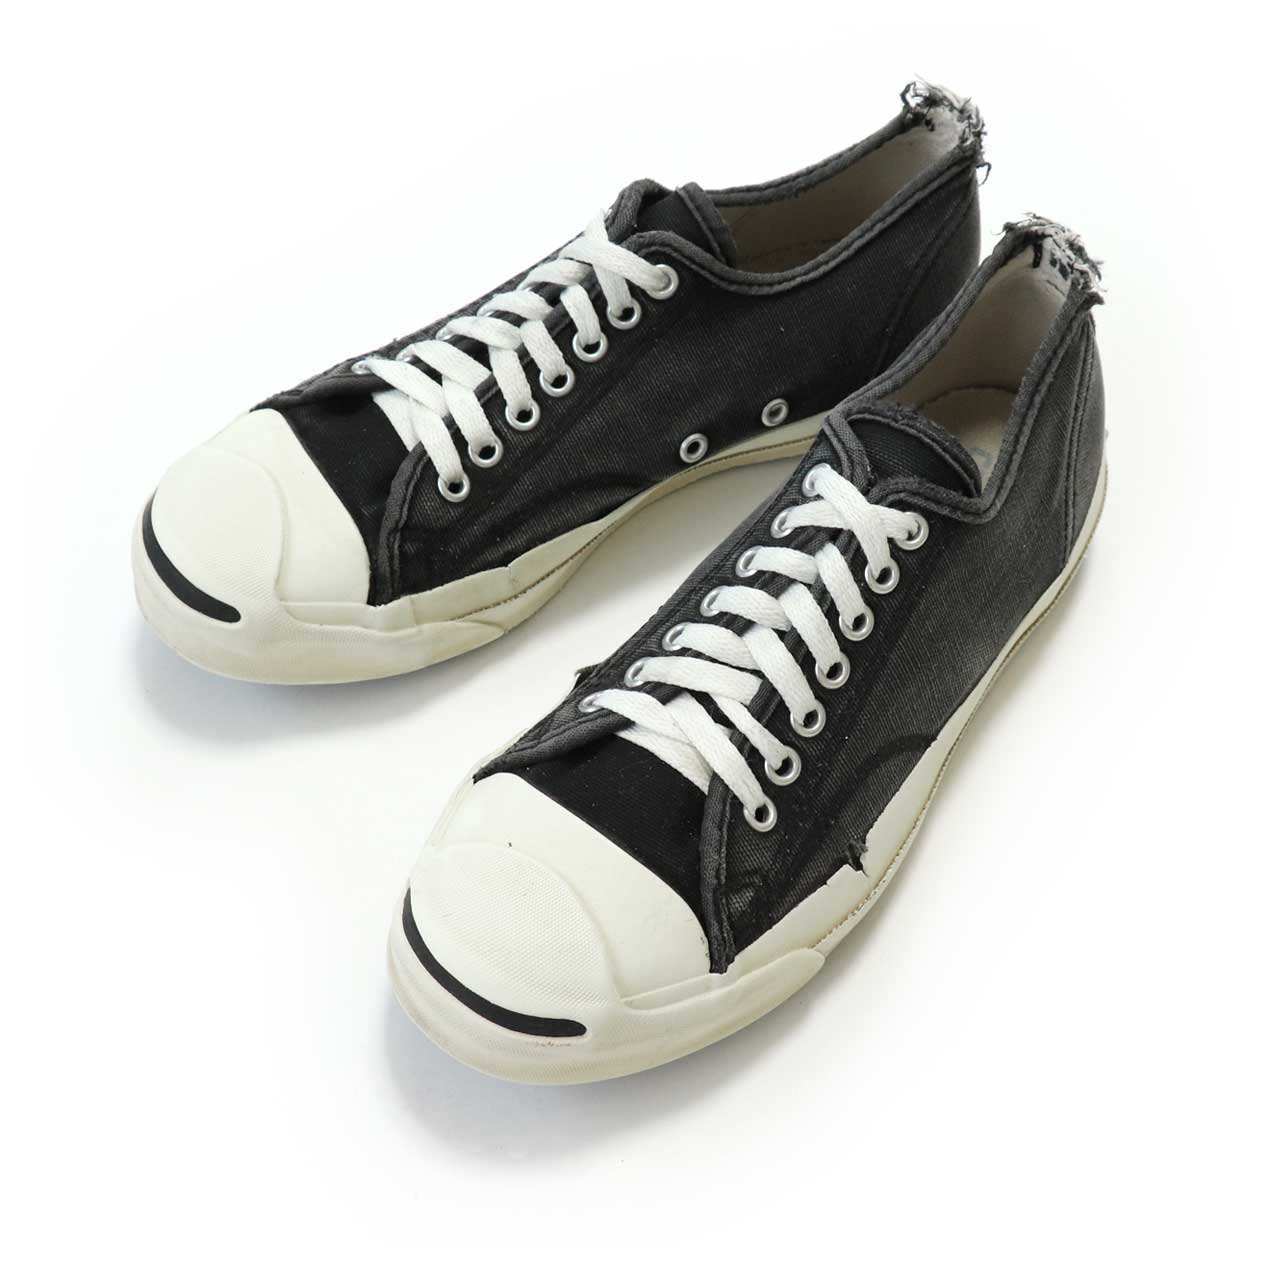 POST JUNK / 90's CONVERSE JACK PURCELL Made In U.S.A. Size 7-1/2